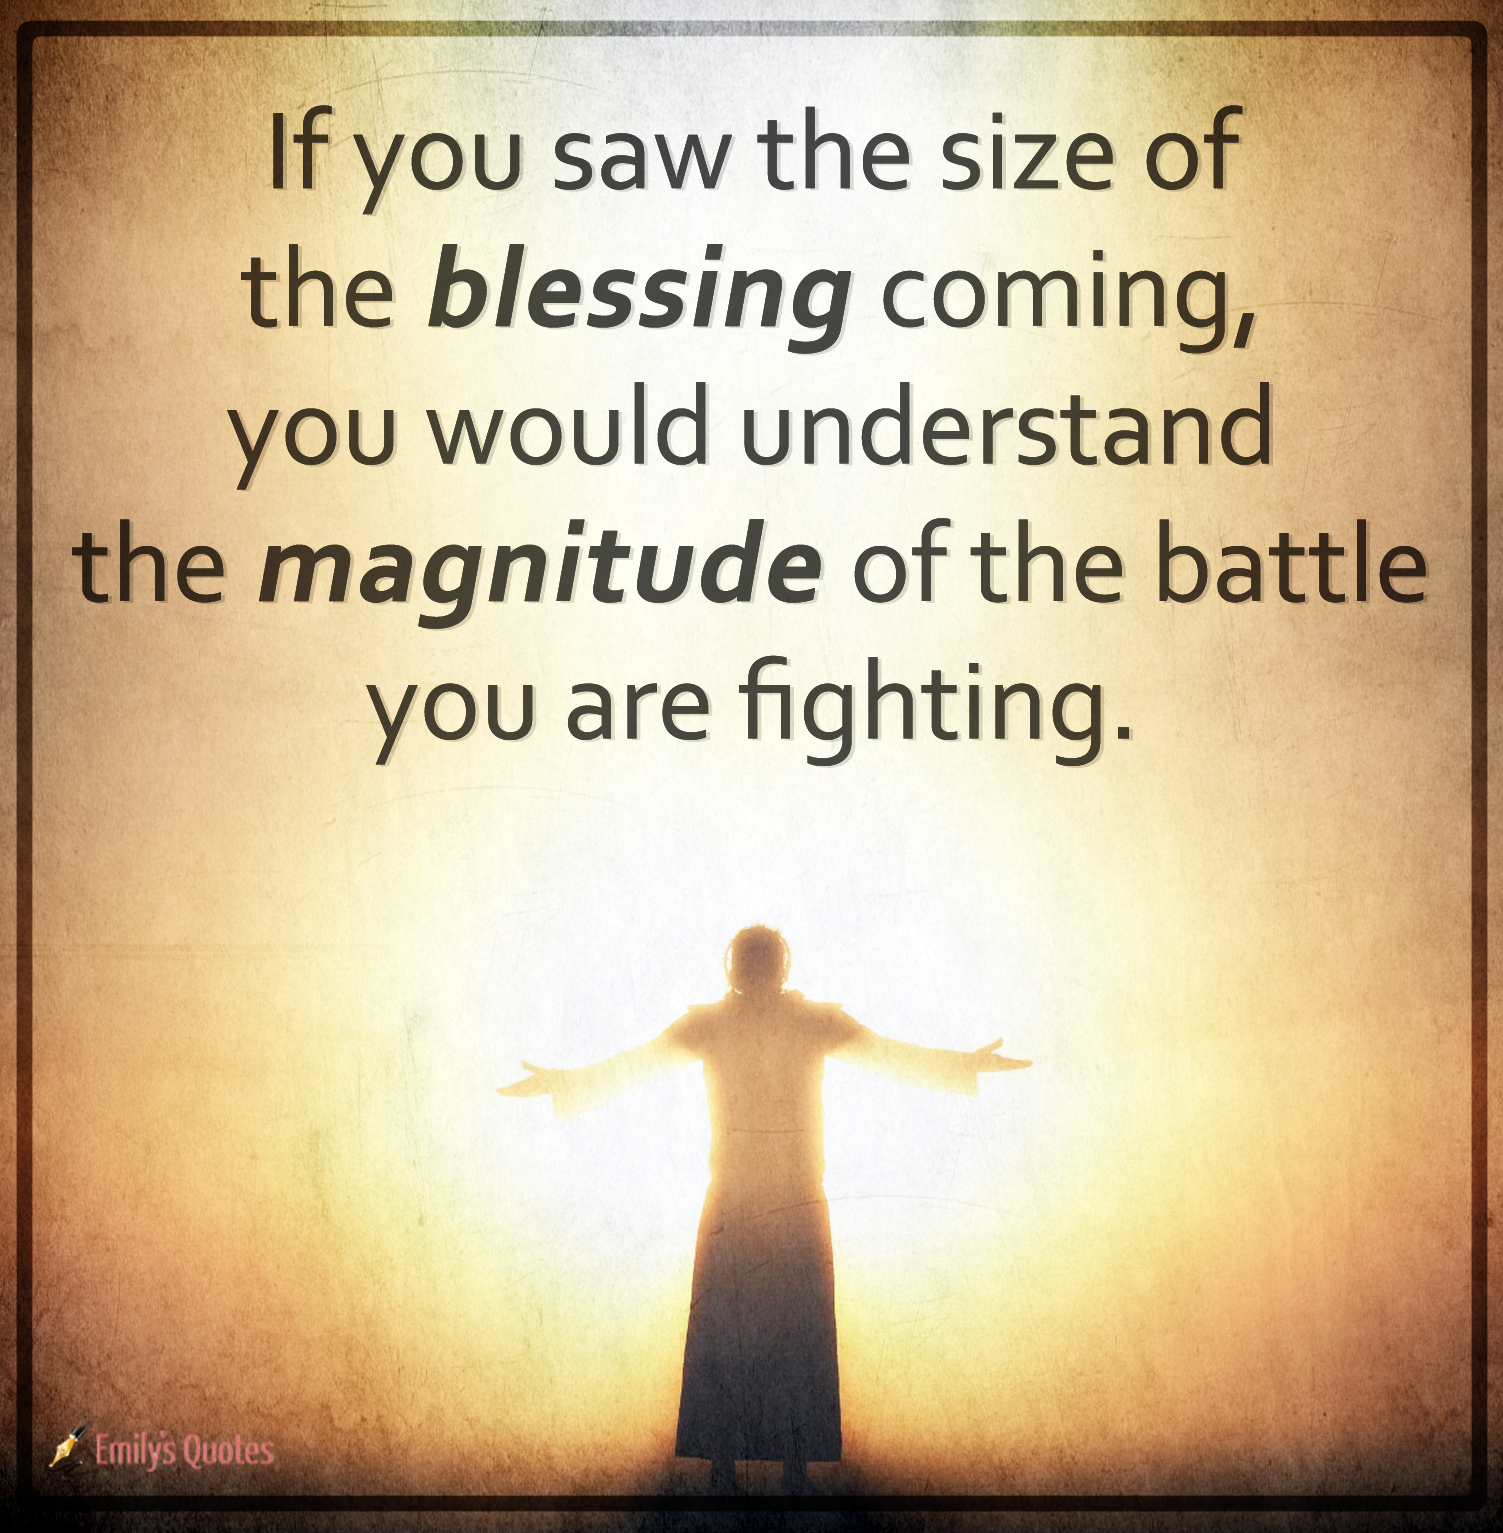 If you saw the size of the blessing coming, you would understand the magnitude